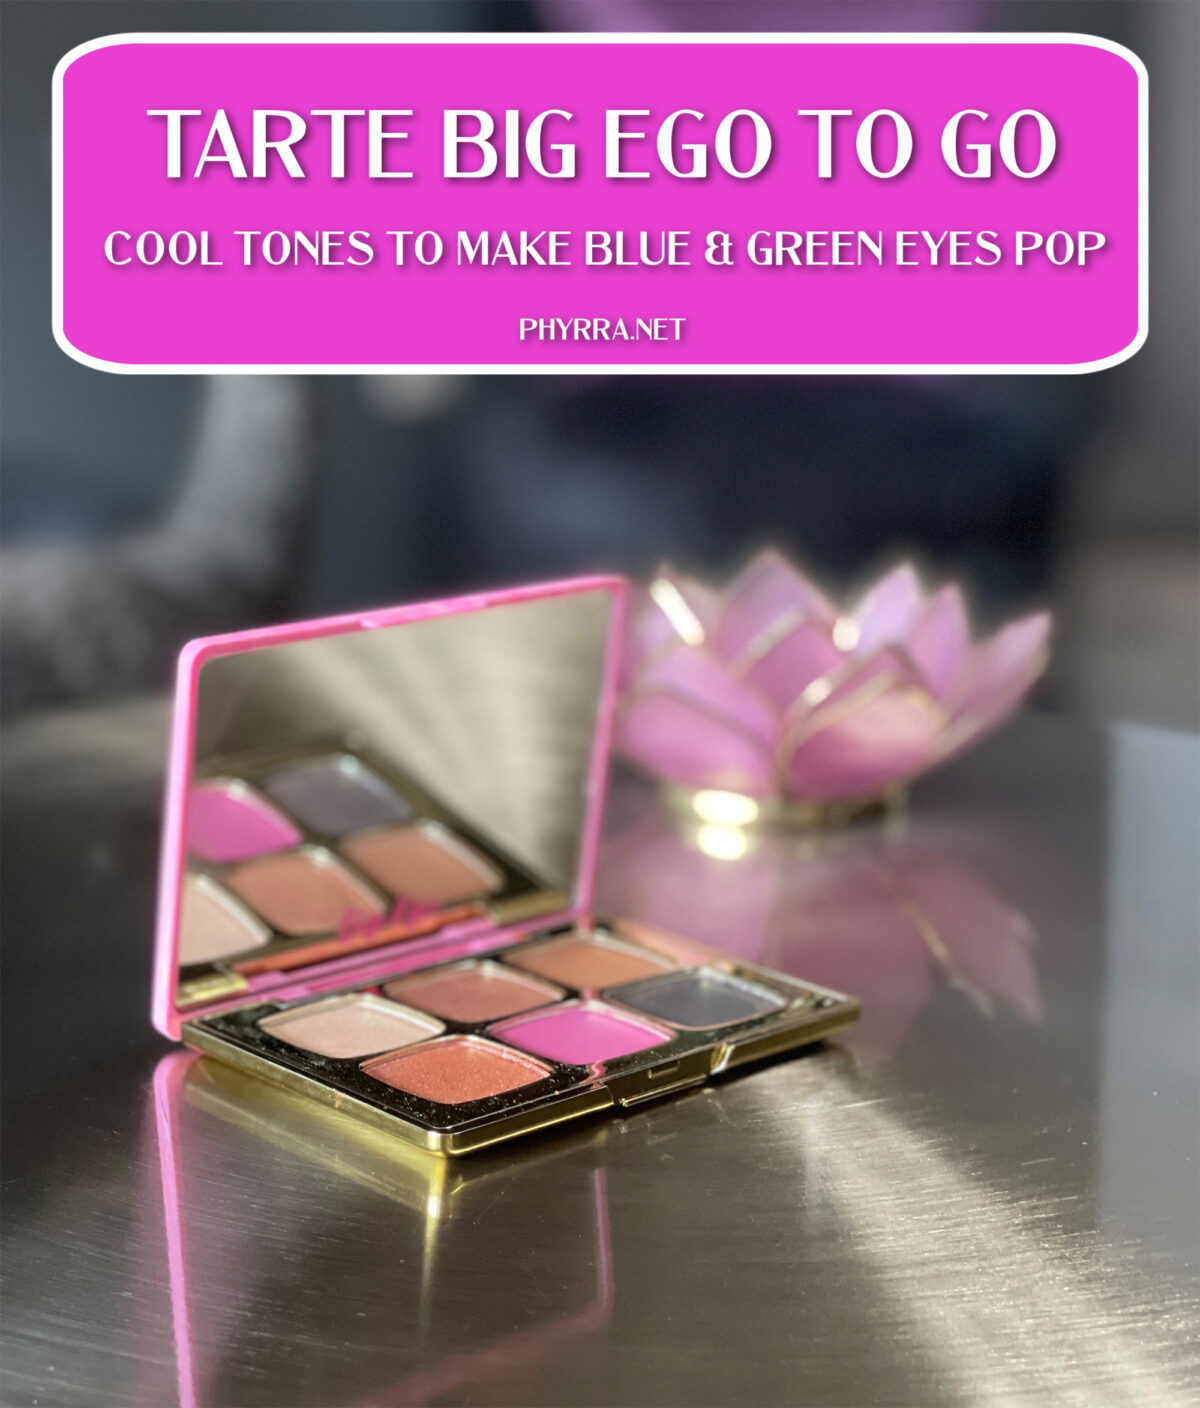 Tarte Big Ego to Go Palette Review, Swatches, Comparison